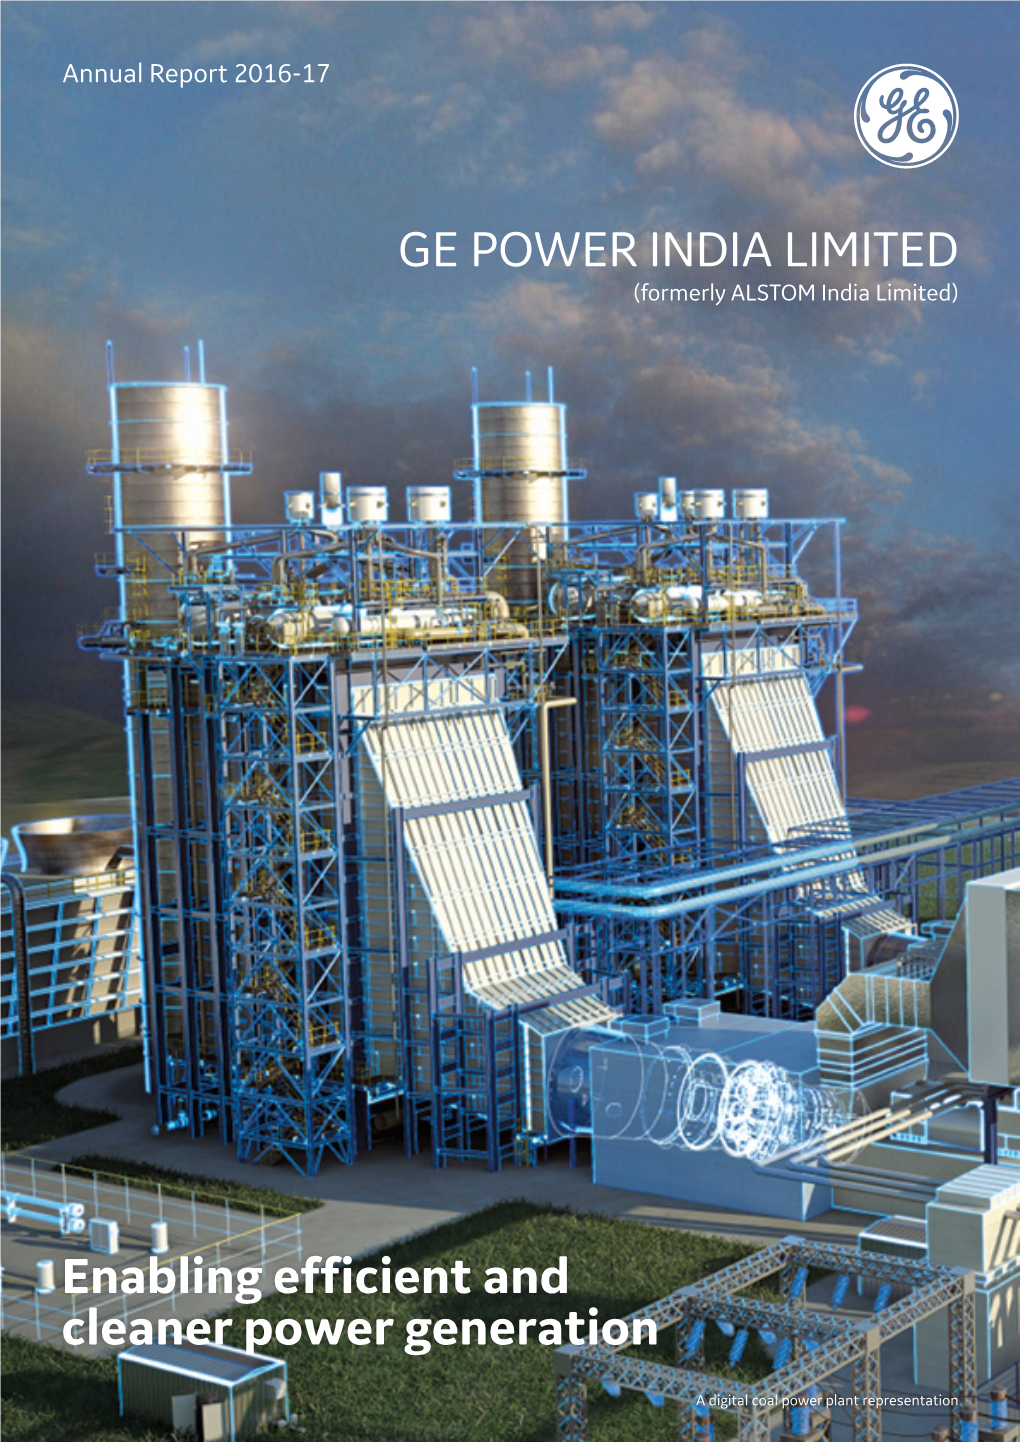 Enabling Efficient and Cleaner Power Generation GE POWER India Limited